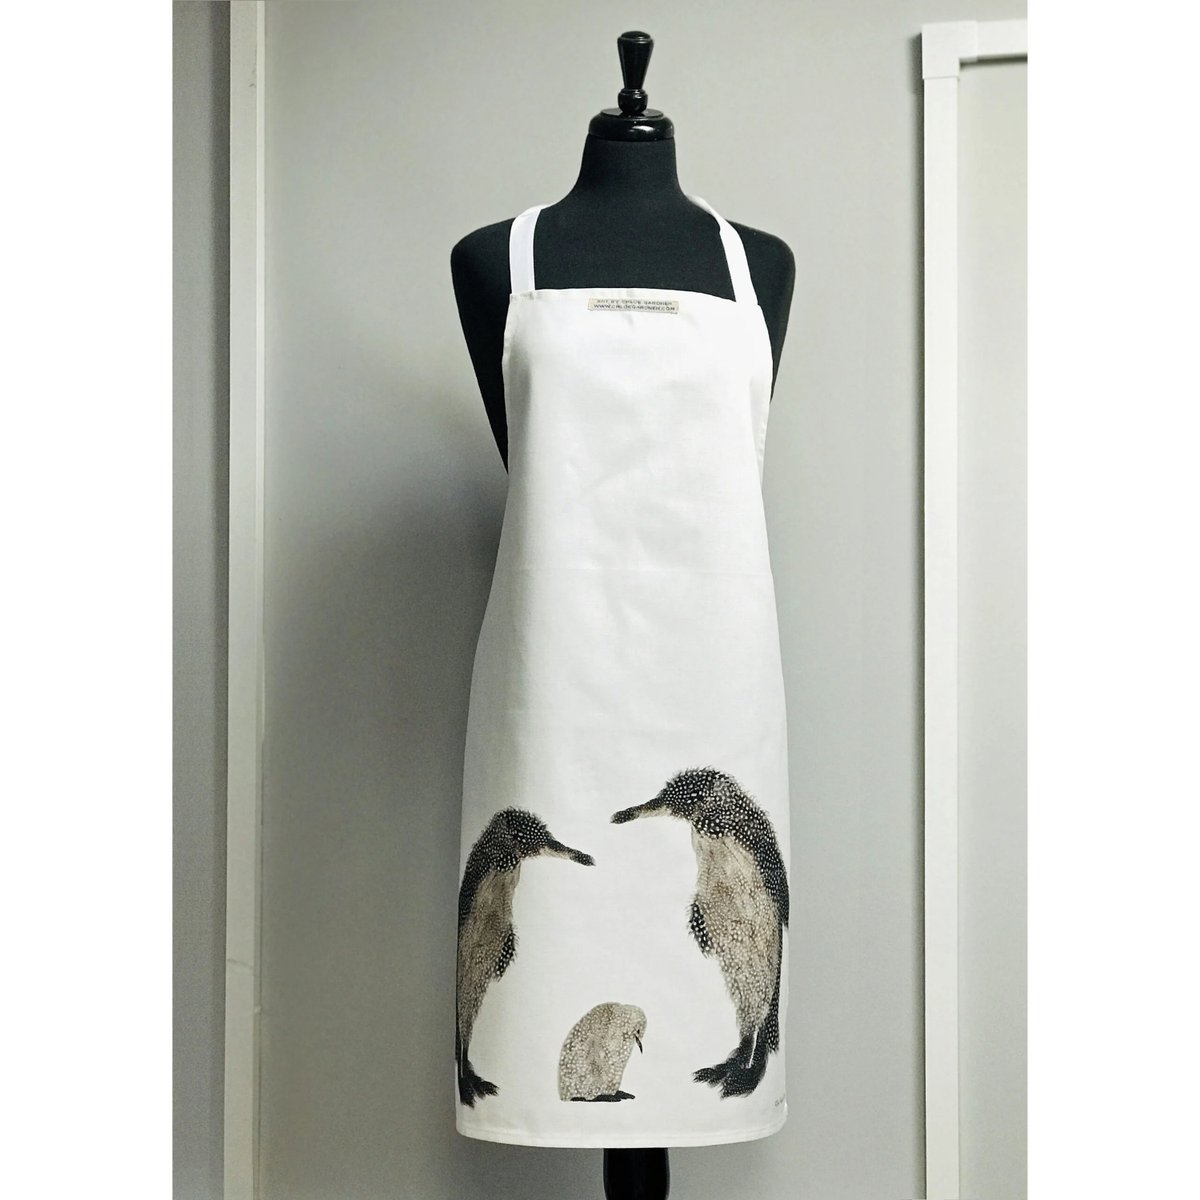 🐧💗🐧 Discover culinary cuteness with our charming grey and white apron featuring an adorable penguin duo. Get yours today and embrace the joy of cooking with these playful pals! 🐧👶  #apronstyle #apron #aprons #birdlovers #giftshop #penguinlove #penguins